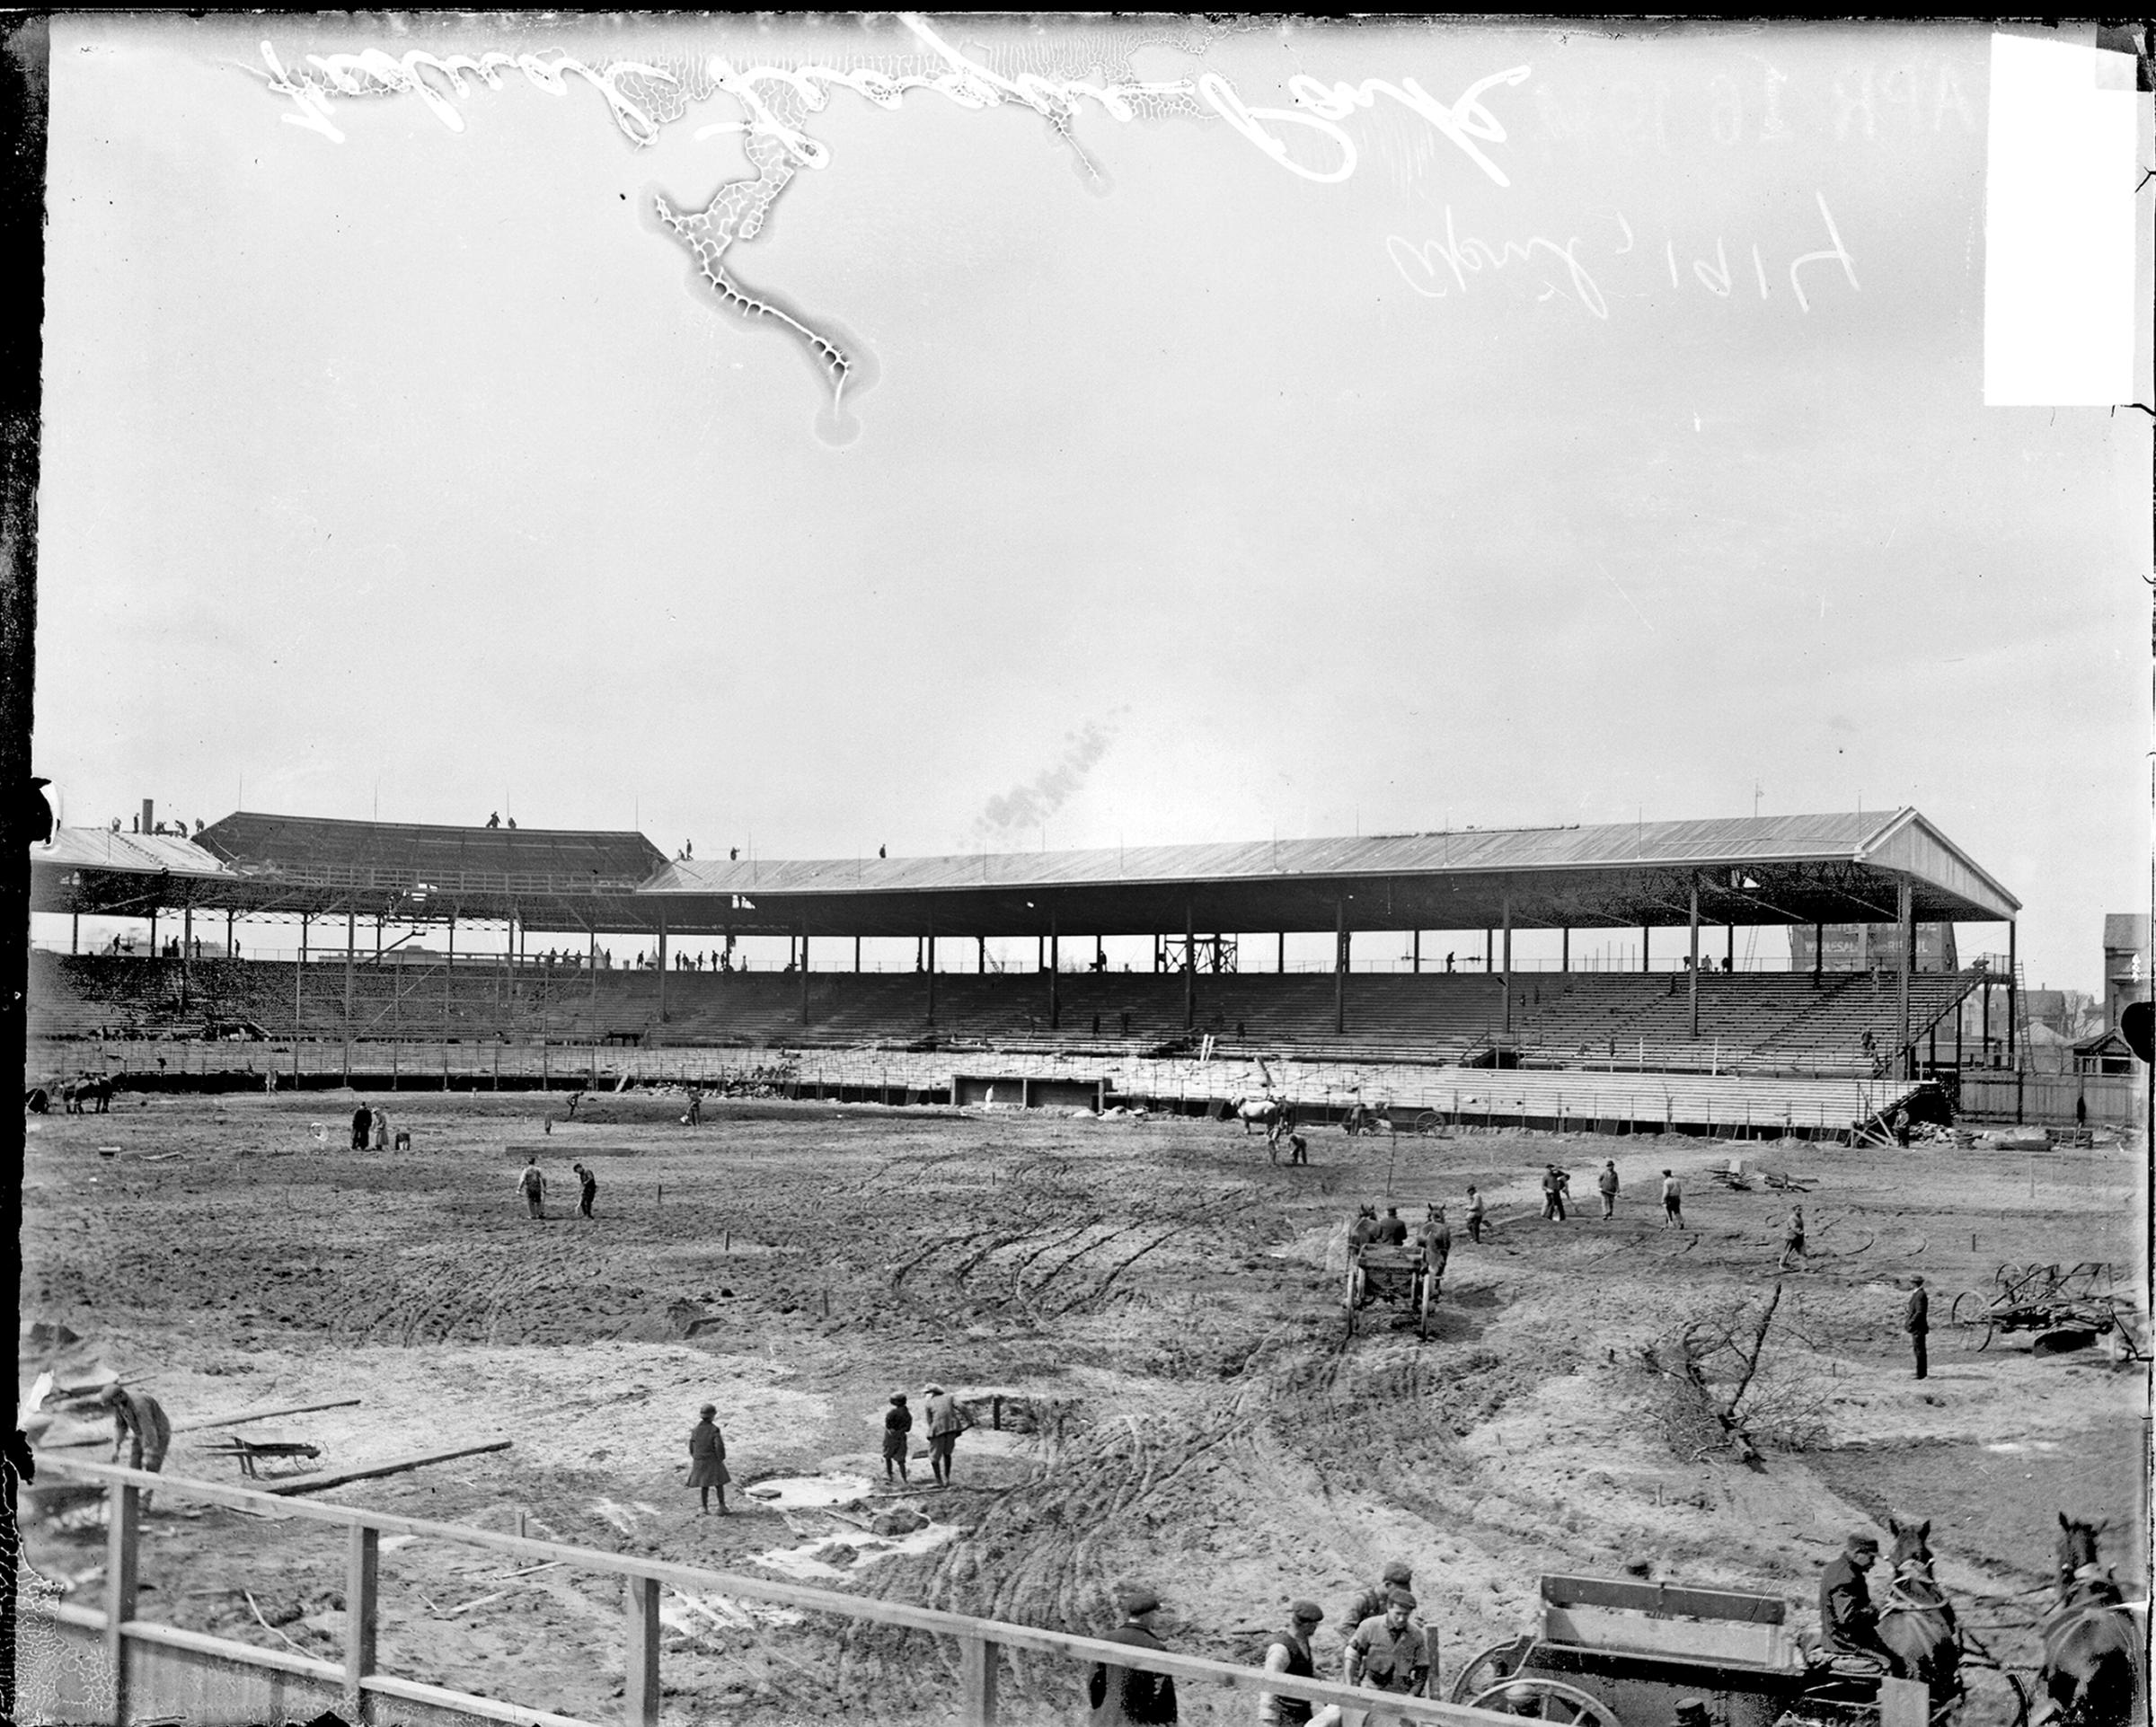 Construction taking place at Federal League ballpark Weeghman Park, Chicago, Illinois, 1914. From the Chicago Daily News collection.